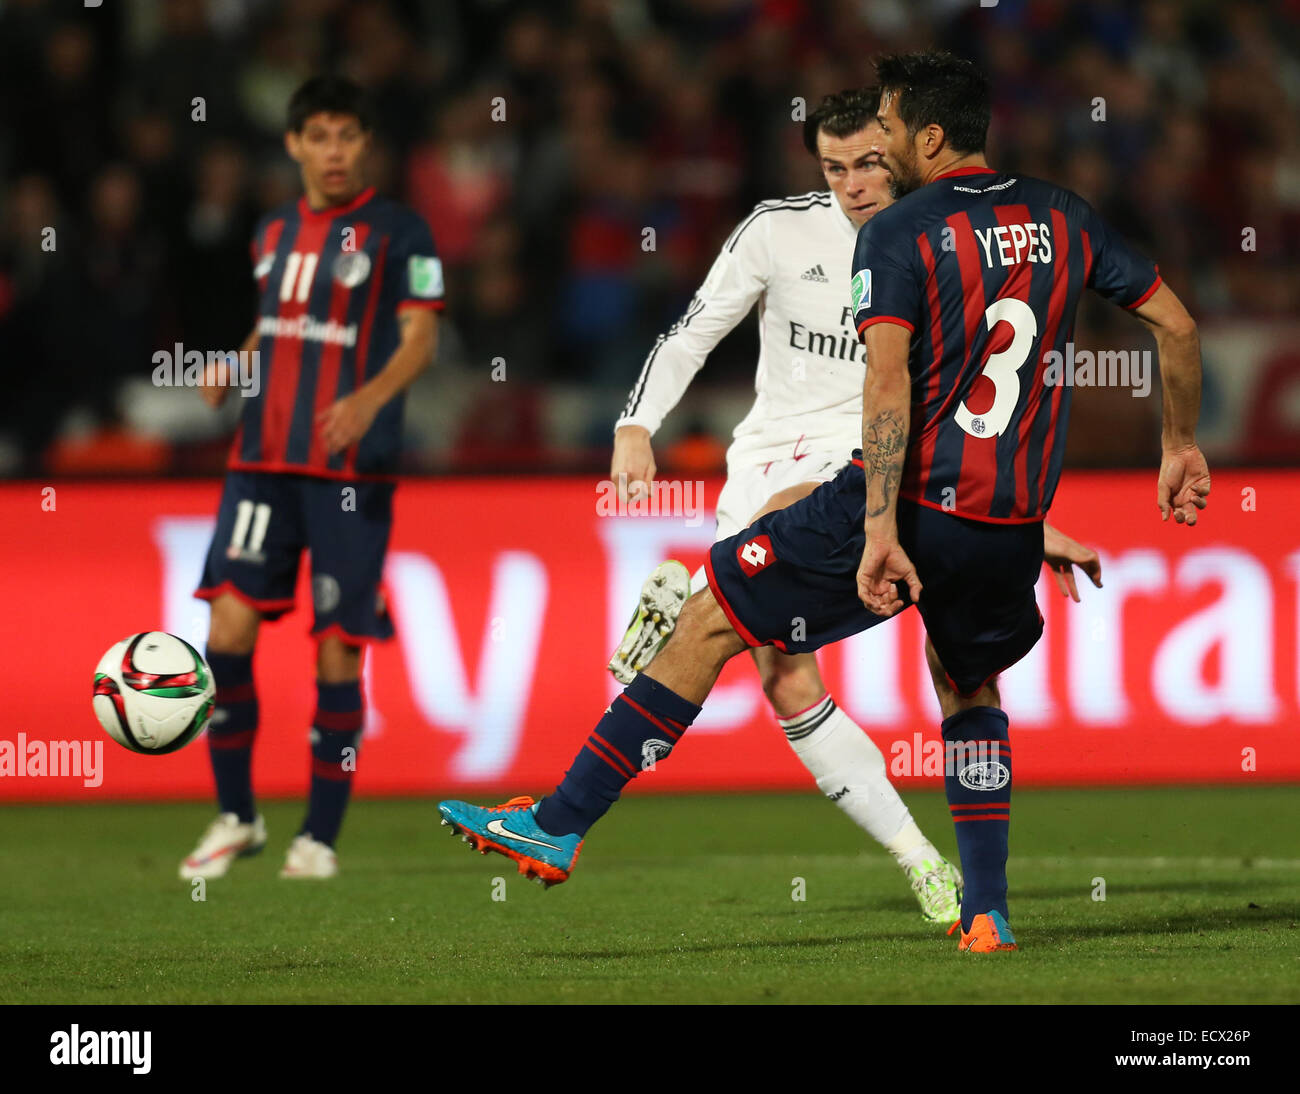 Marrakesh, Morocco. 20th Dec, 2014. FIFA World Club Cup. Final. Real Madrid versus San Lorenzo. Real Madrid midfielder Gareth Bale (11) shoots and scores the second goal. Credit:  Action Plus Sports/Alamy Live News Stock Photo